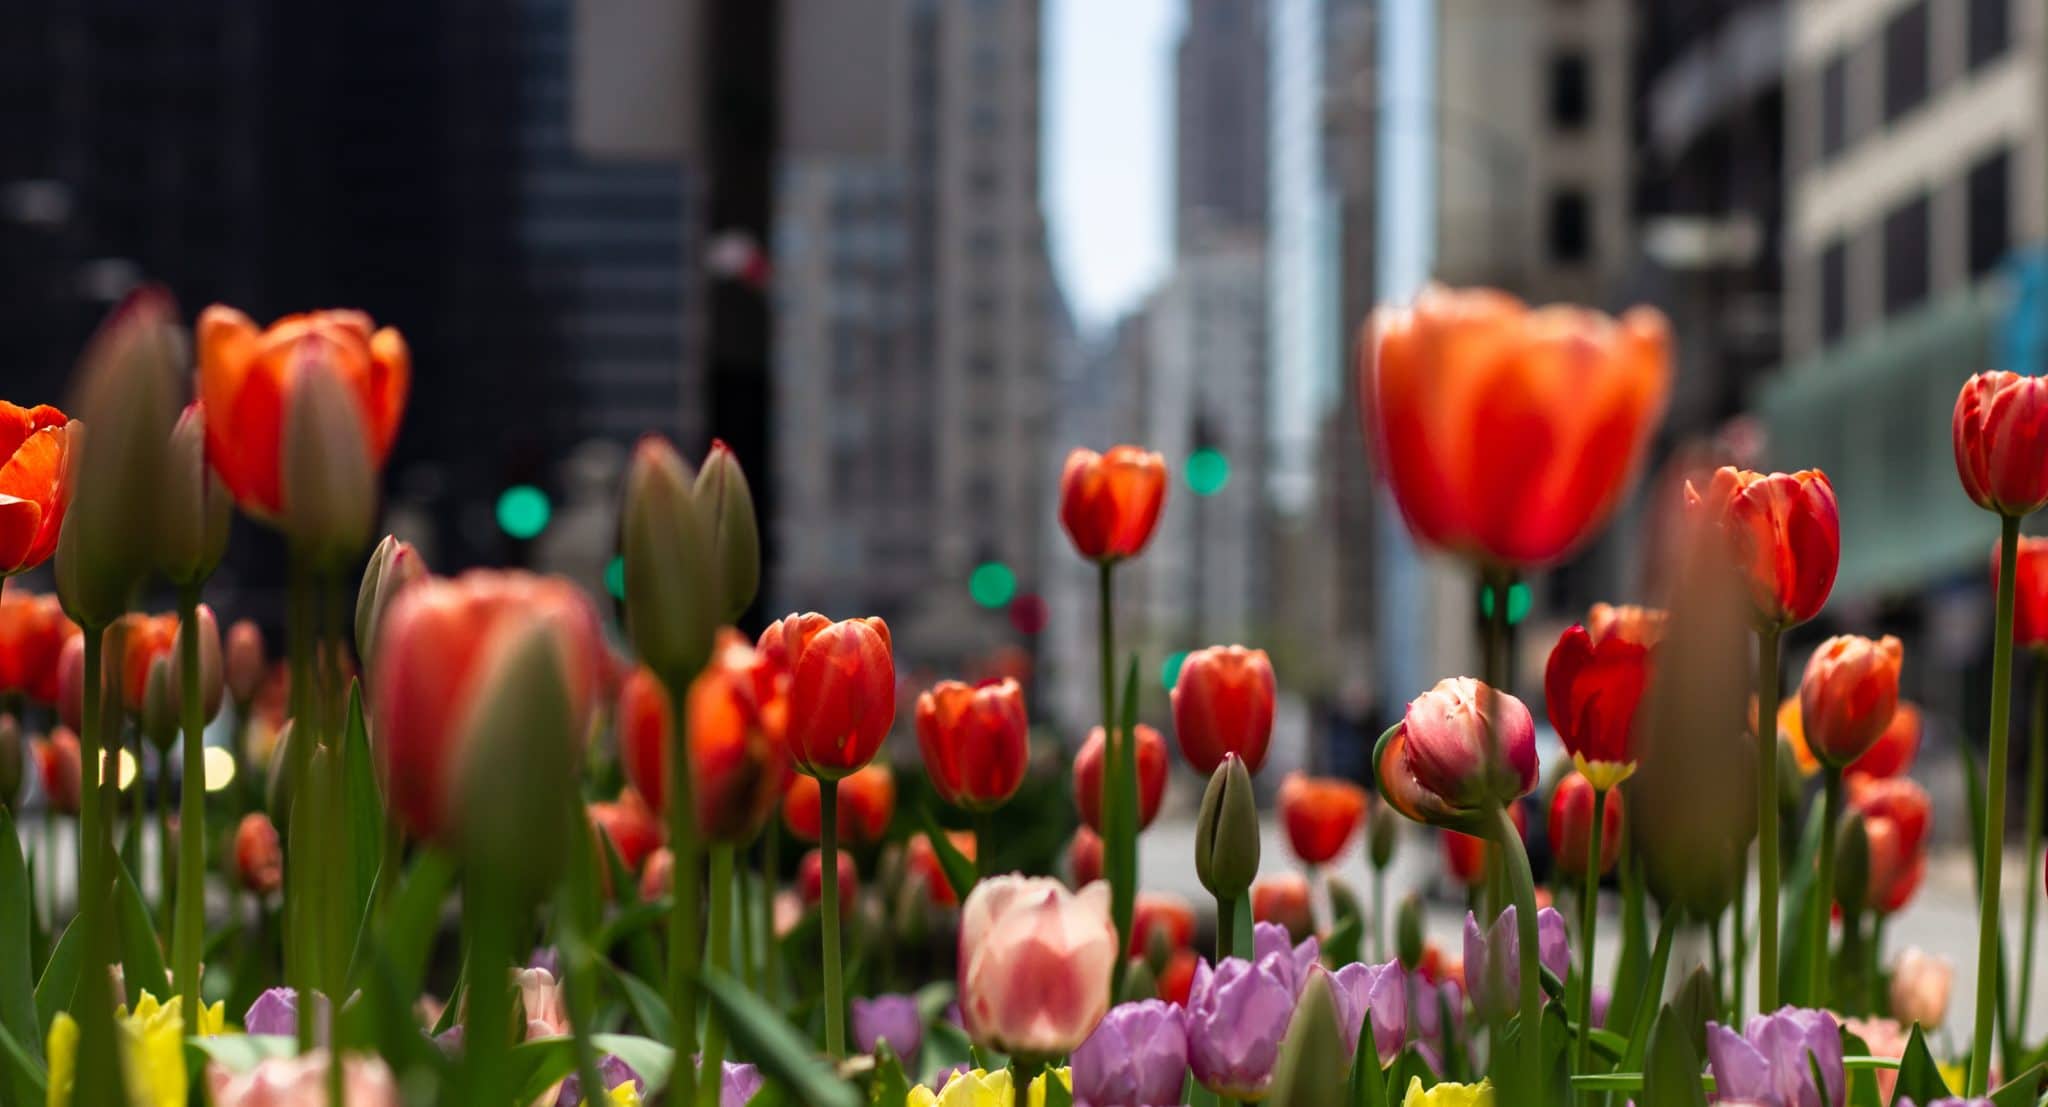 Image showing the tulips blossoming on Michigan Avenue, Chicago.